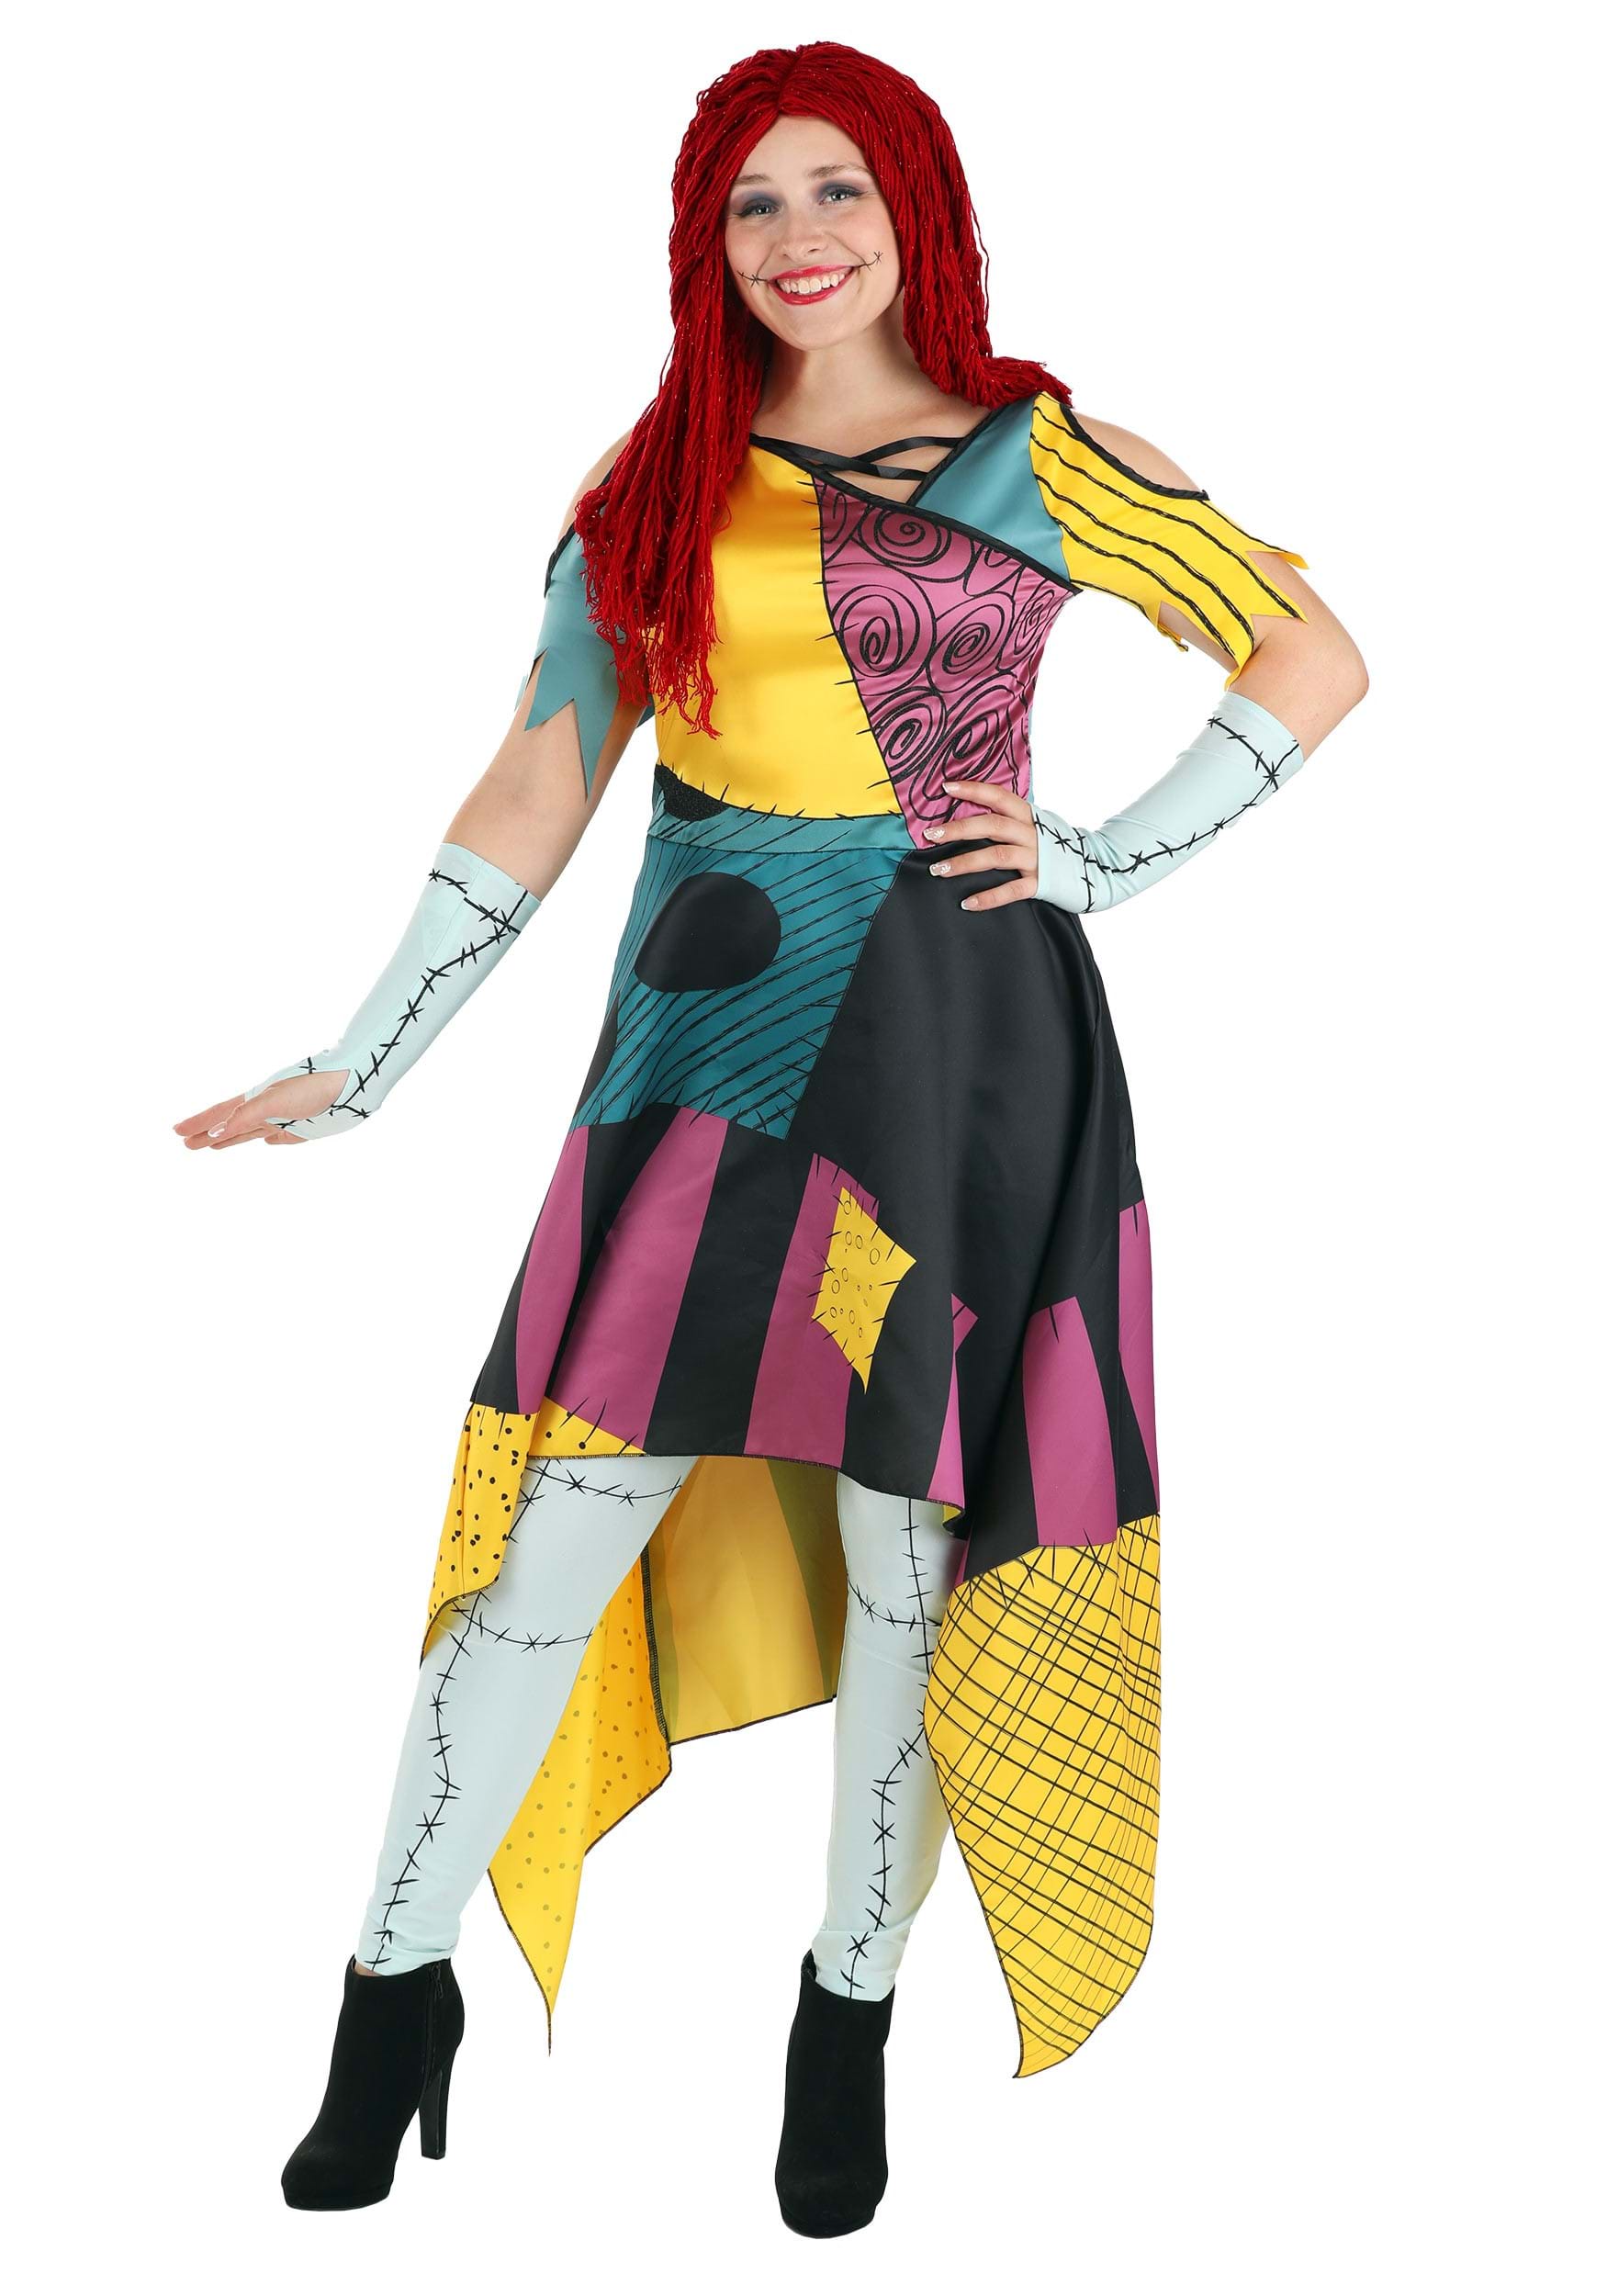 Image of Sally Prestige Adult Costume from Nightmare Before Christmas ID DI21598-L